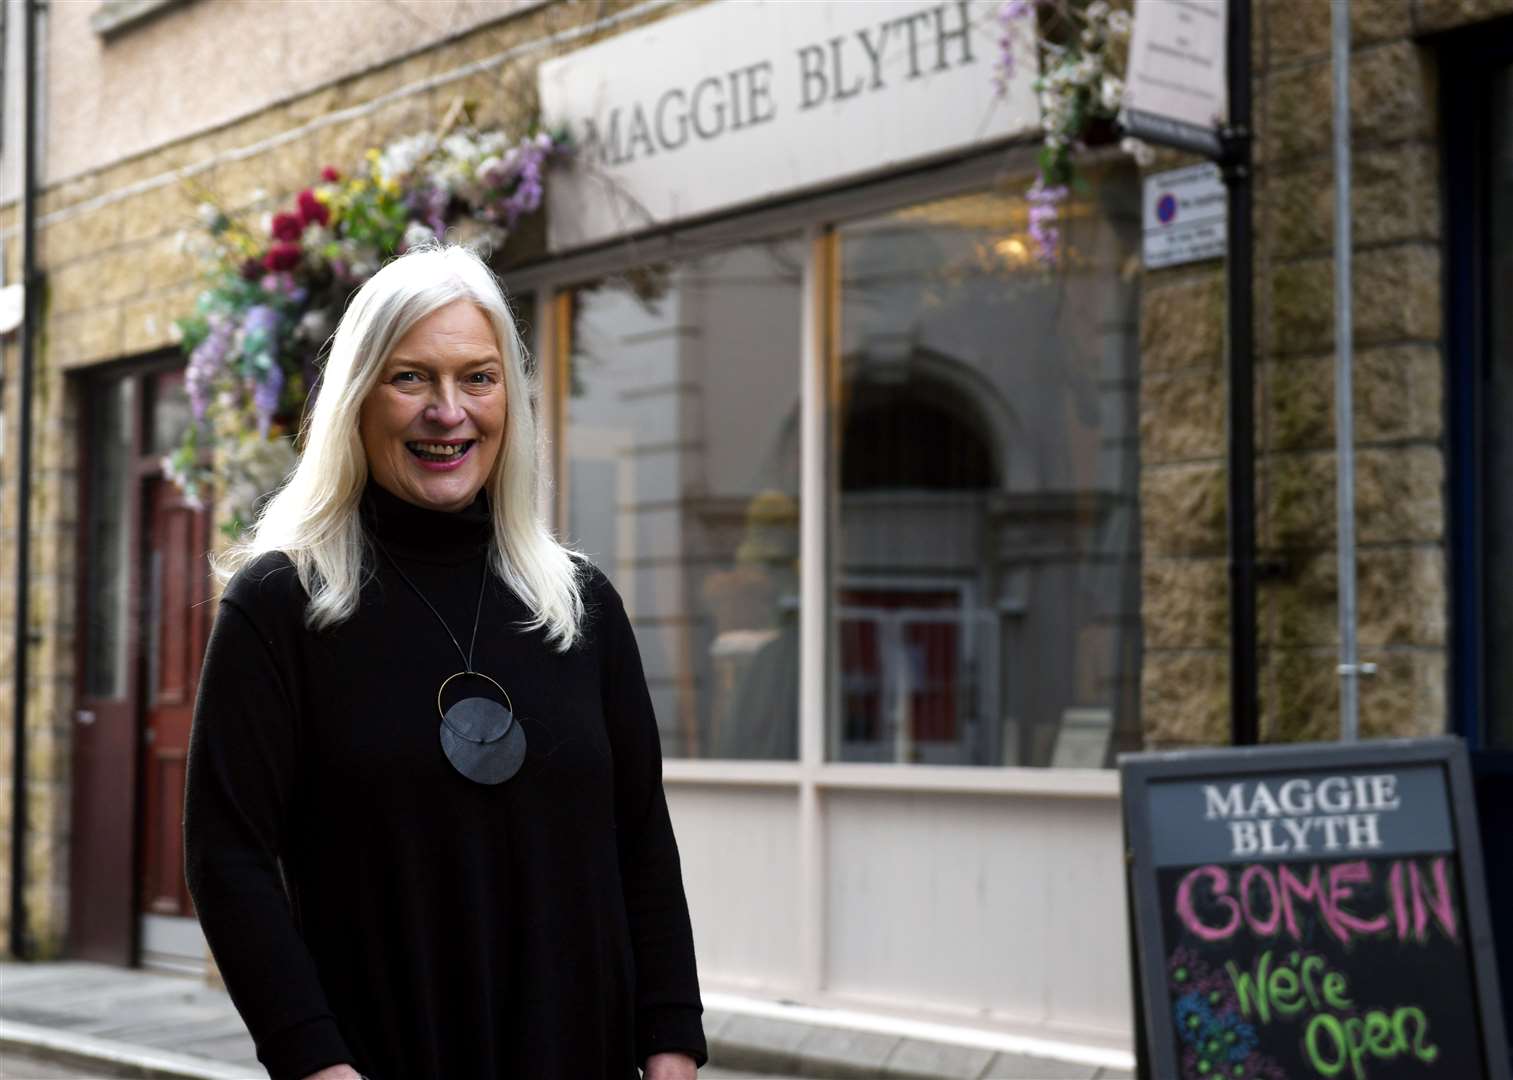 Maggie Blyth is to make her premises available to other traders. Picture: James Mackenzie